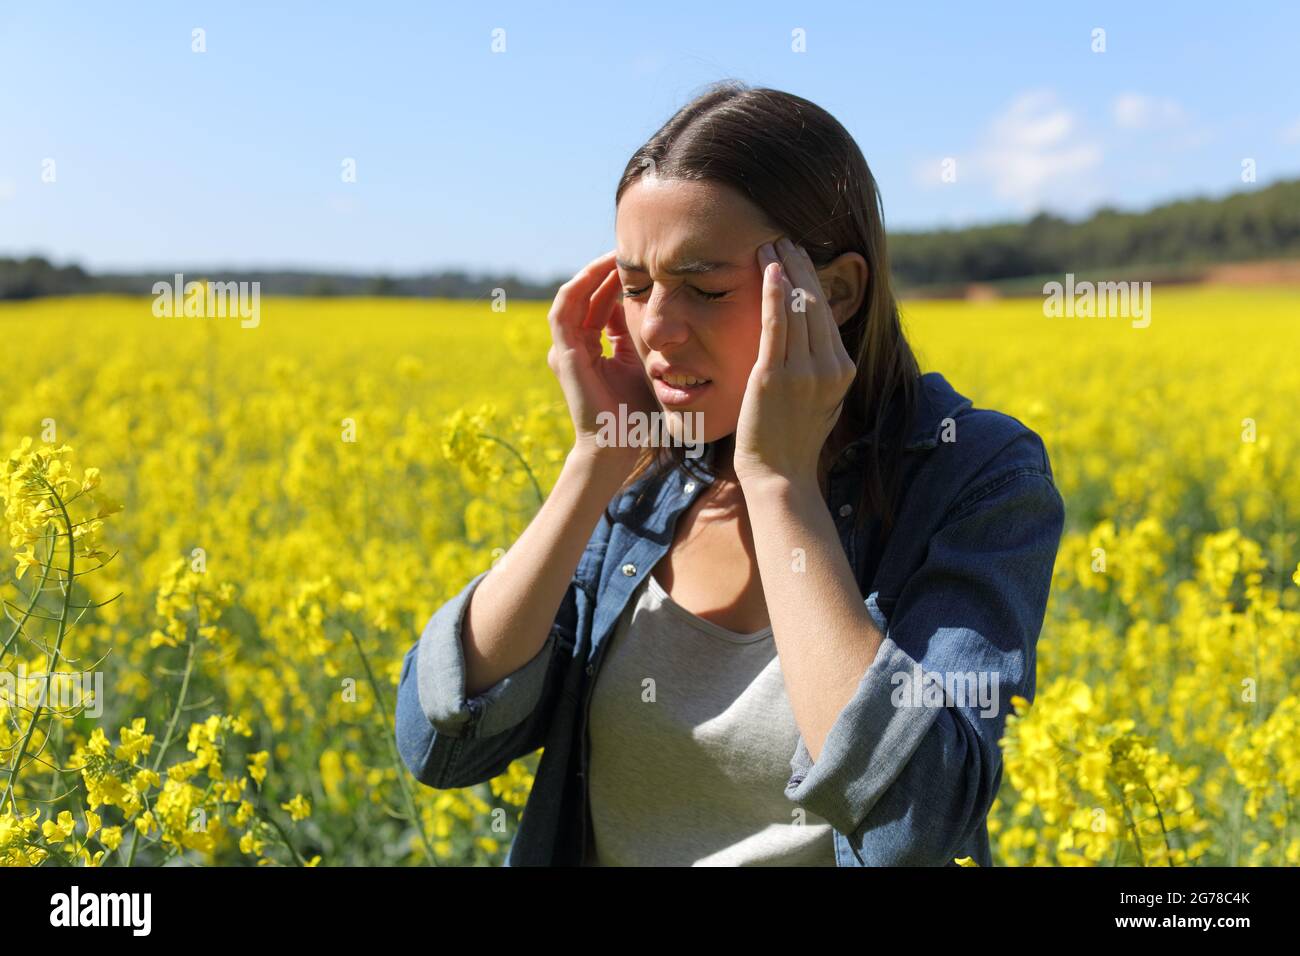 Stressed woman suffering head ache in a yellow field on summer Stock Photo